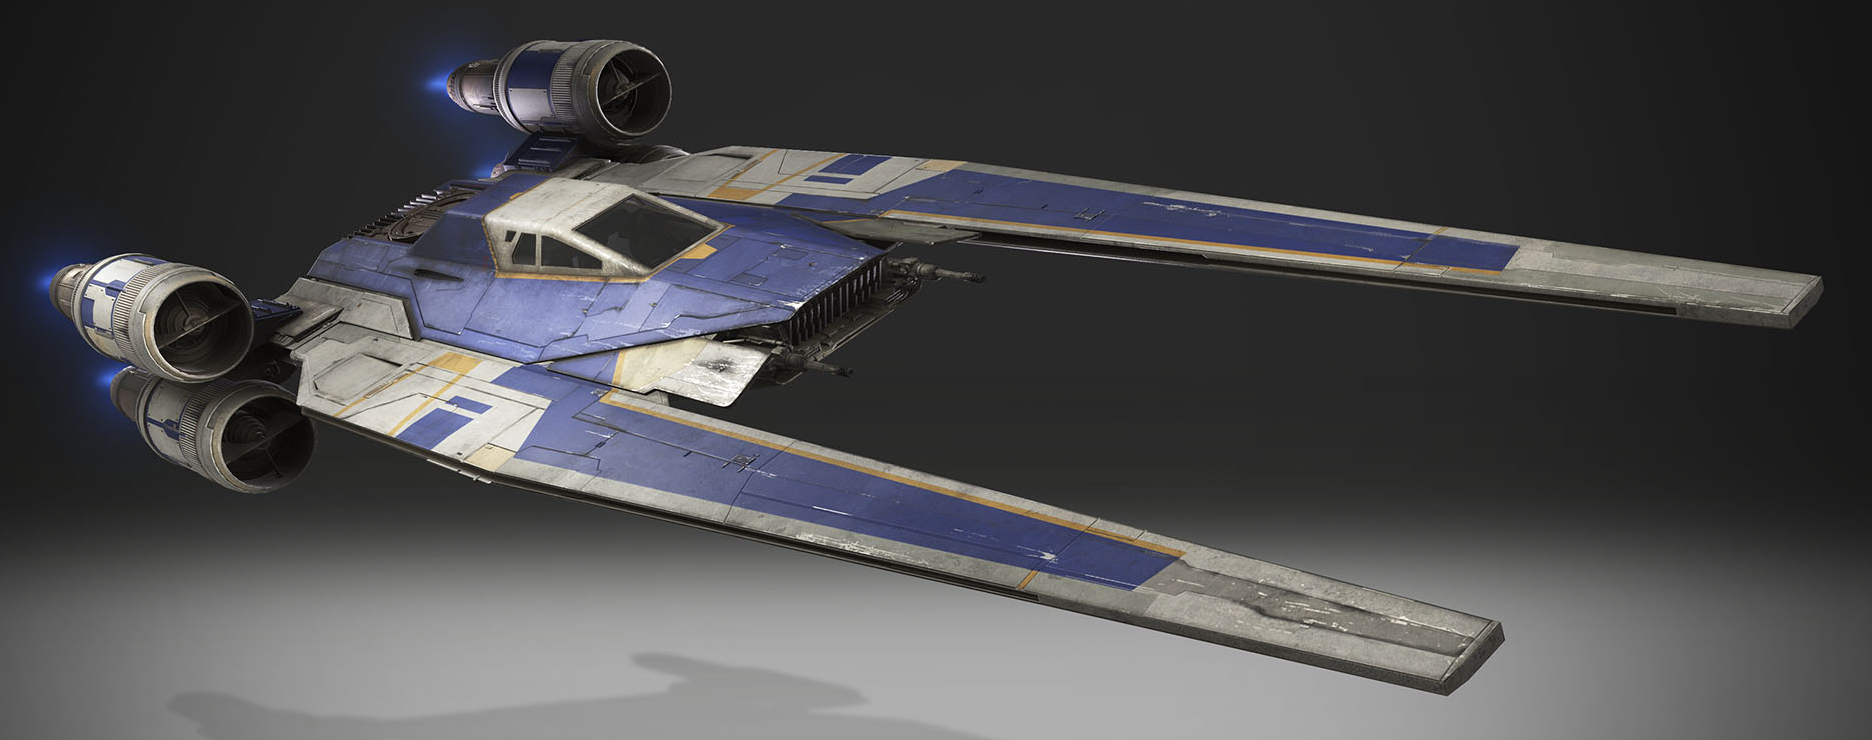 U-Wing from Star Wars Battlefront 2 graphic